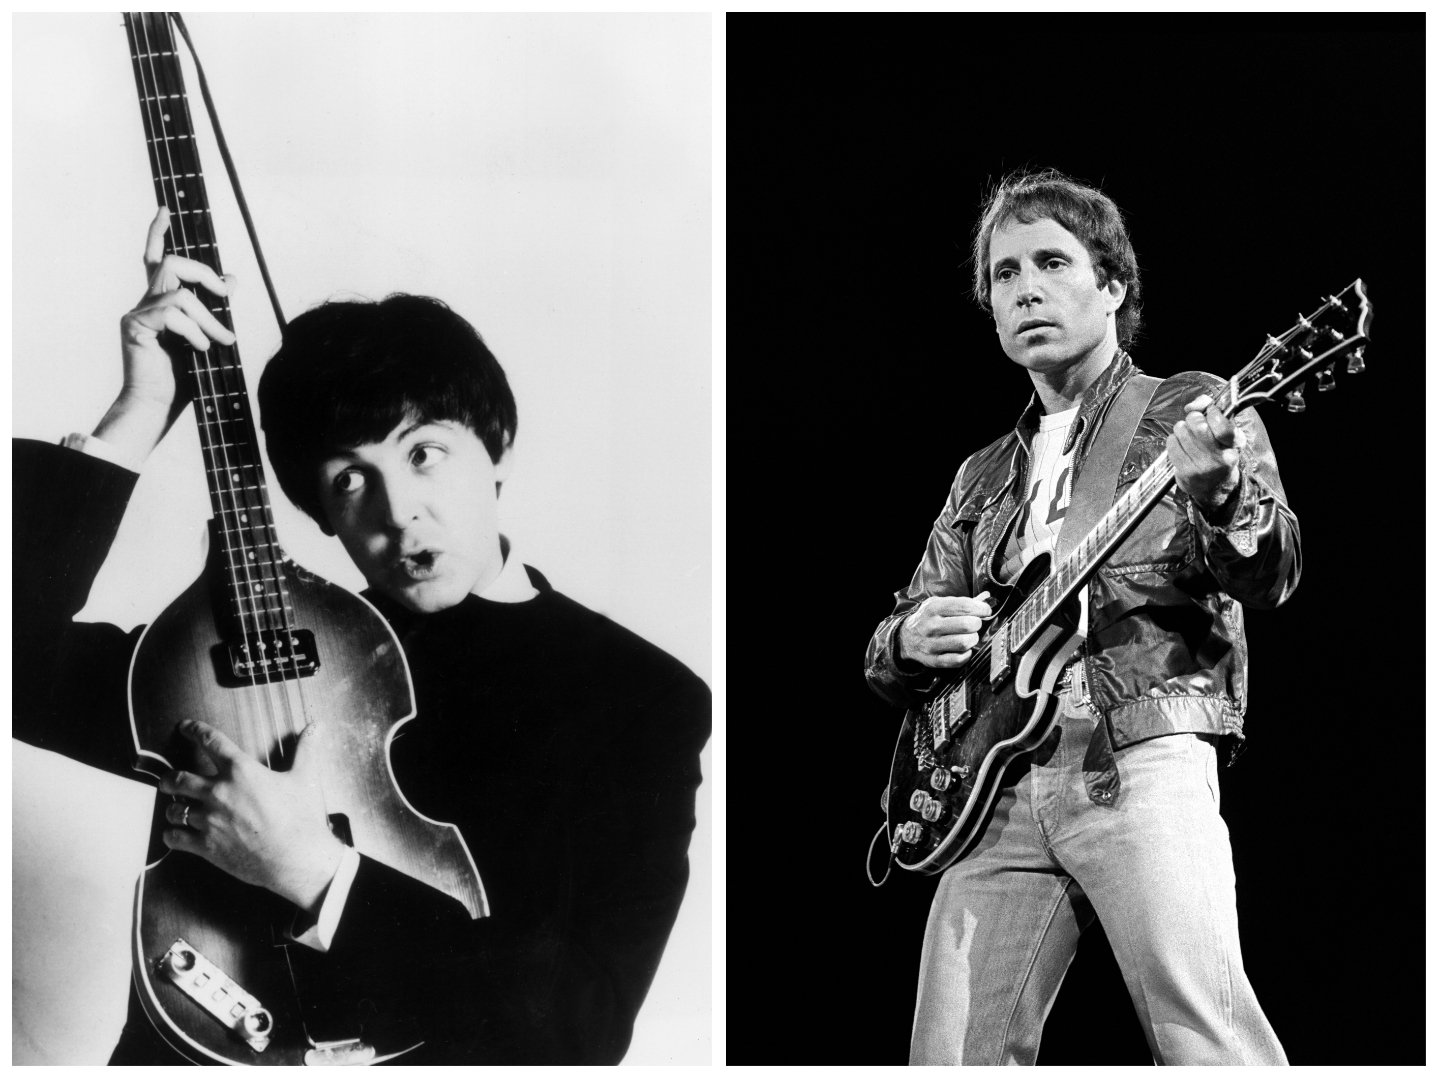 A black and white picture of Paul McCartney holding a bass guitar upright. Paul Simon stands and holds a guitar.